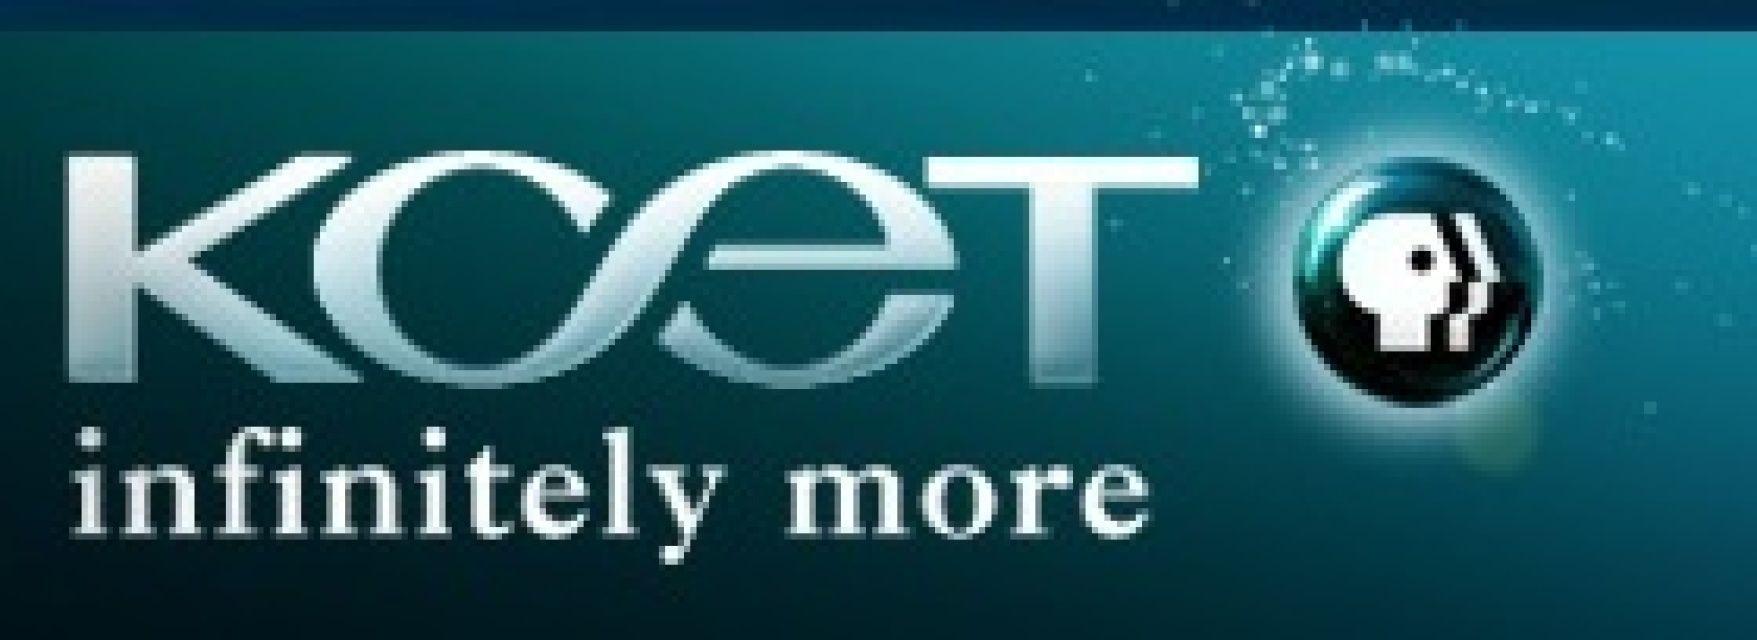 KCET Logo - KCET Says Goodbye to PBS, Will go Independent January 1st Updated